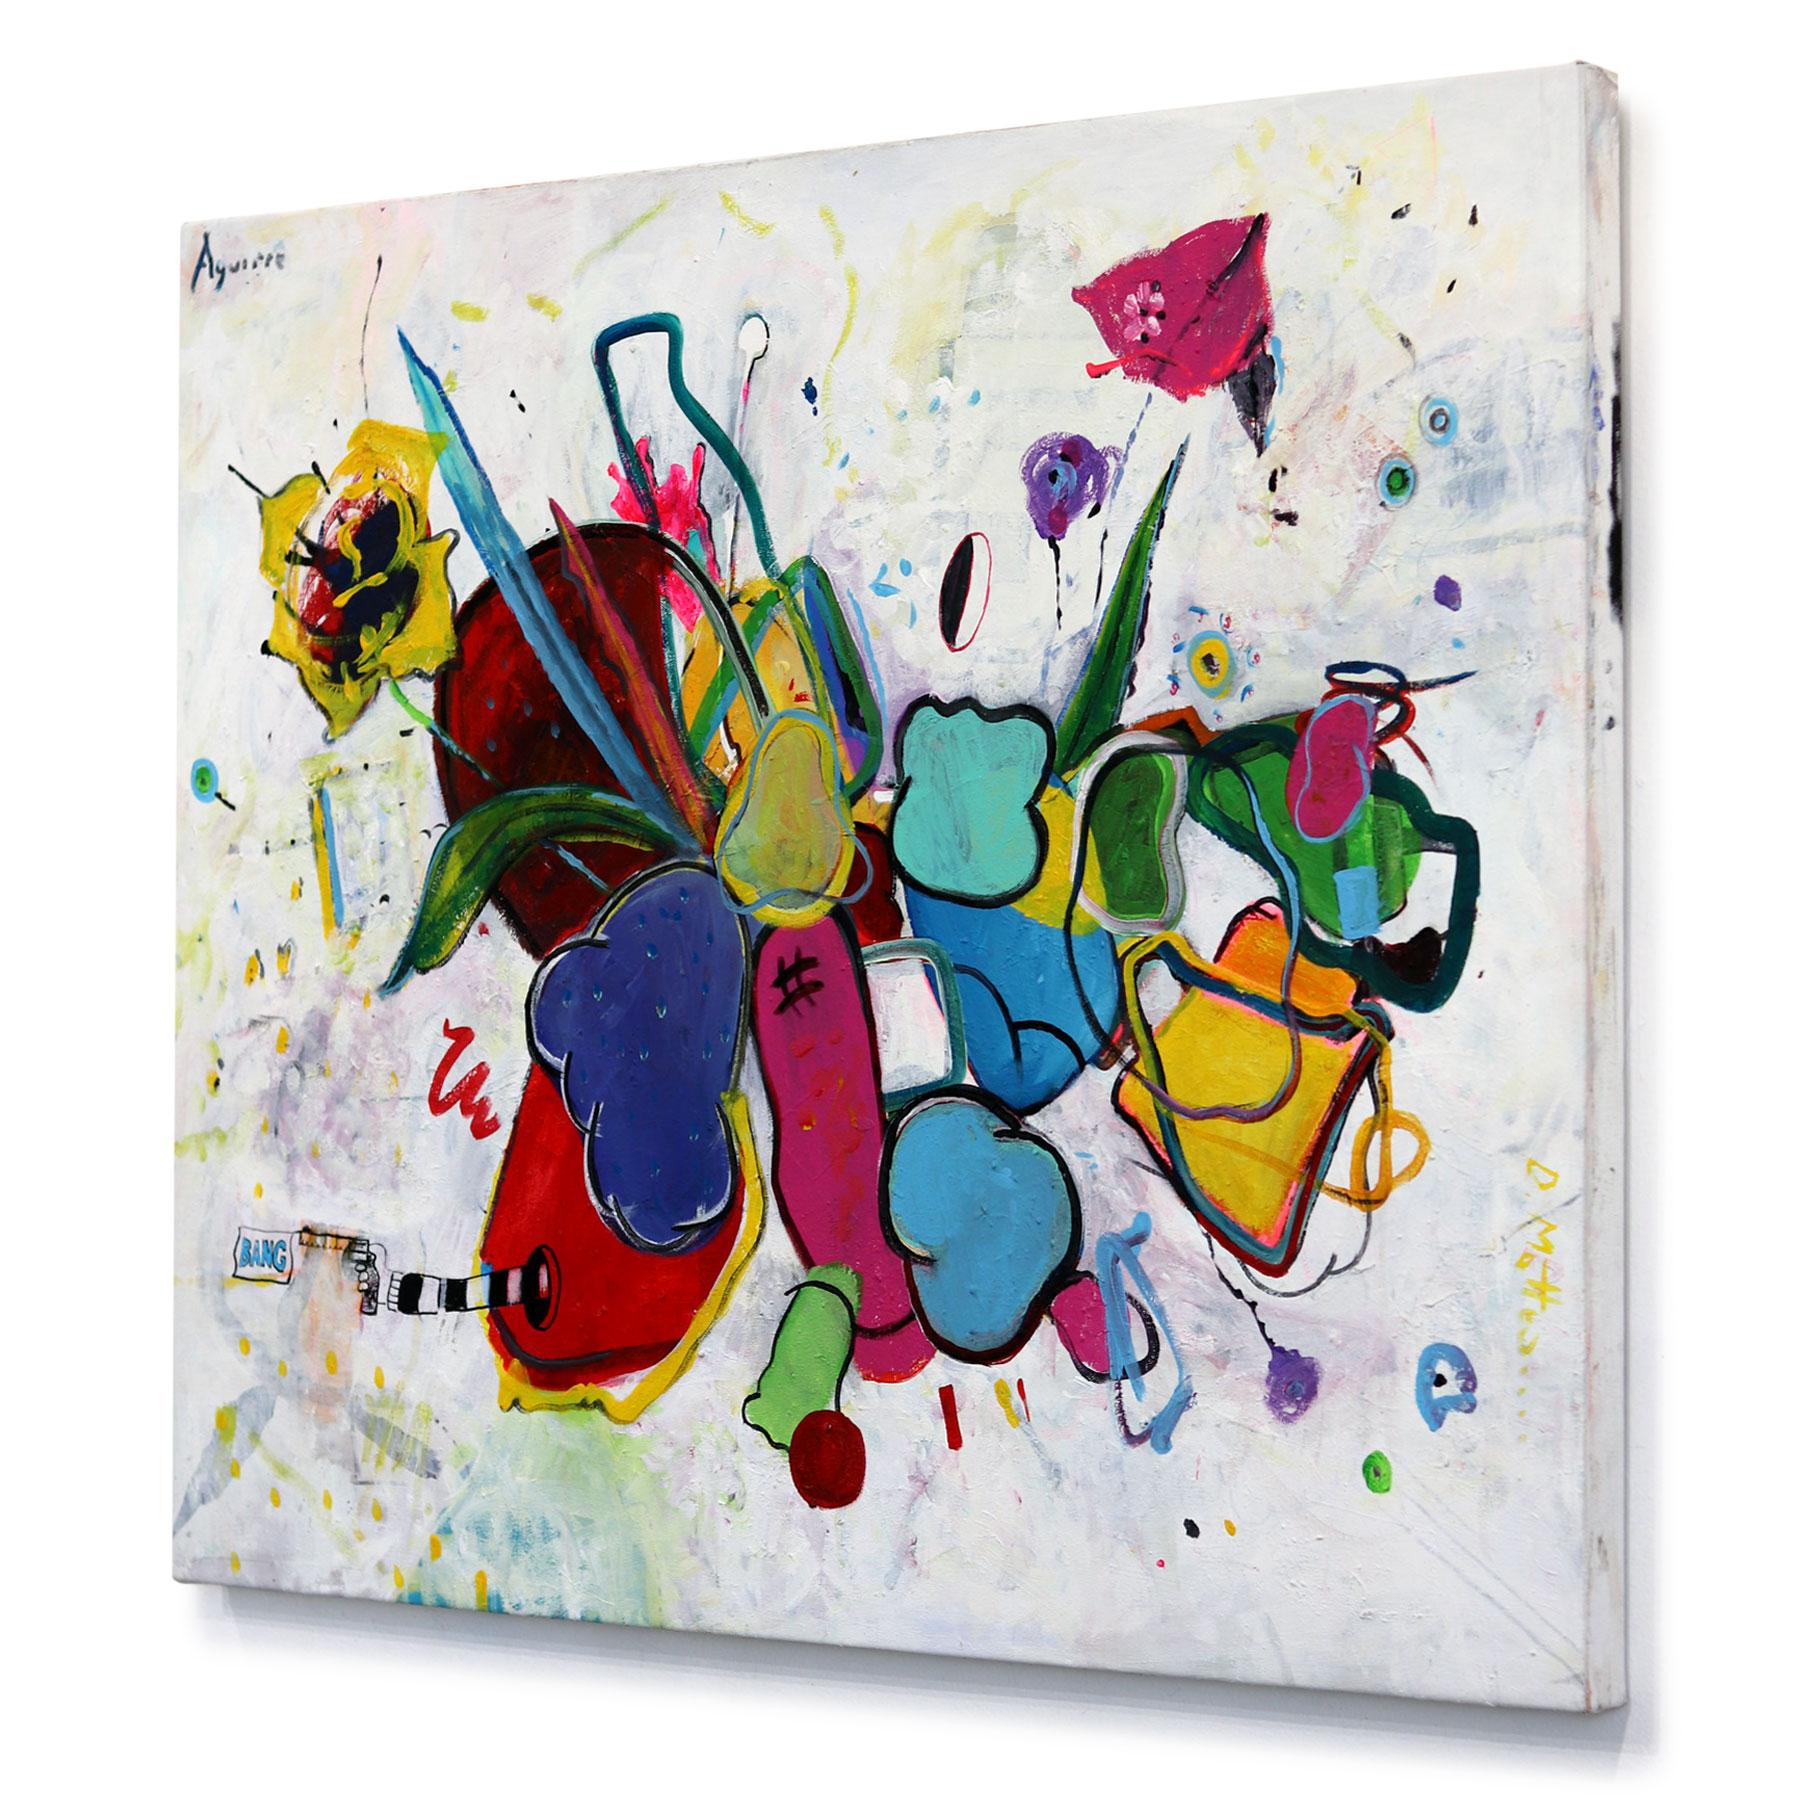 Flower Power - Vibrant Colorful Abstract Original Oil Painting on Canvas For Sale 2